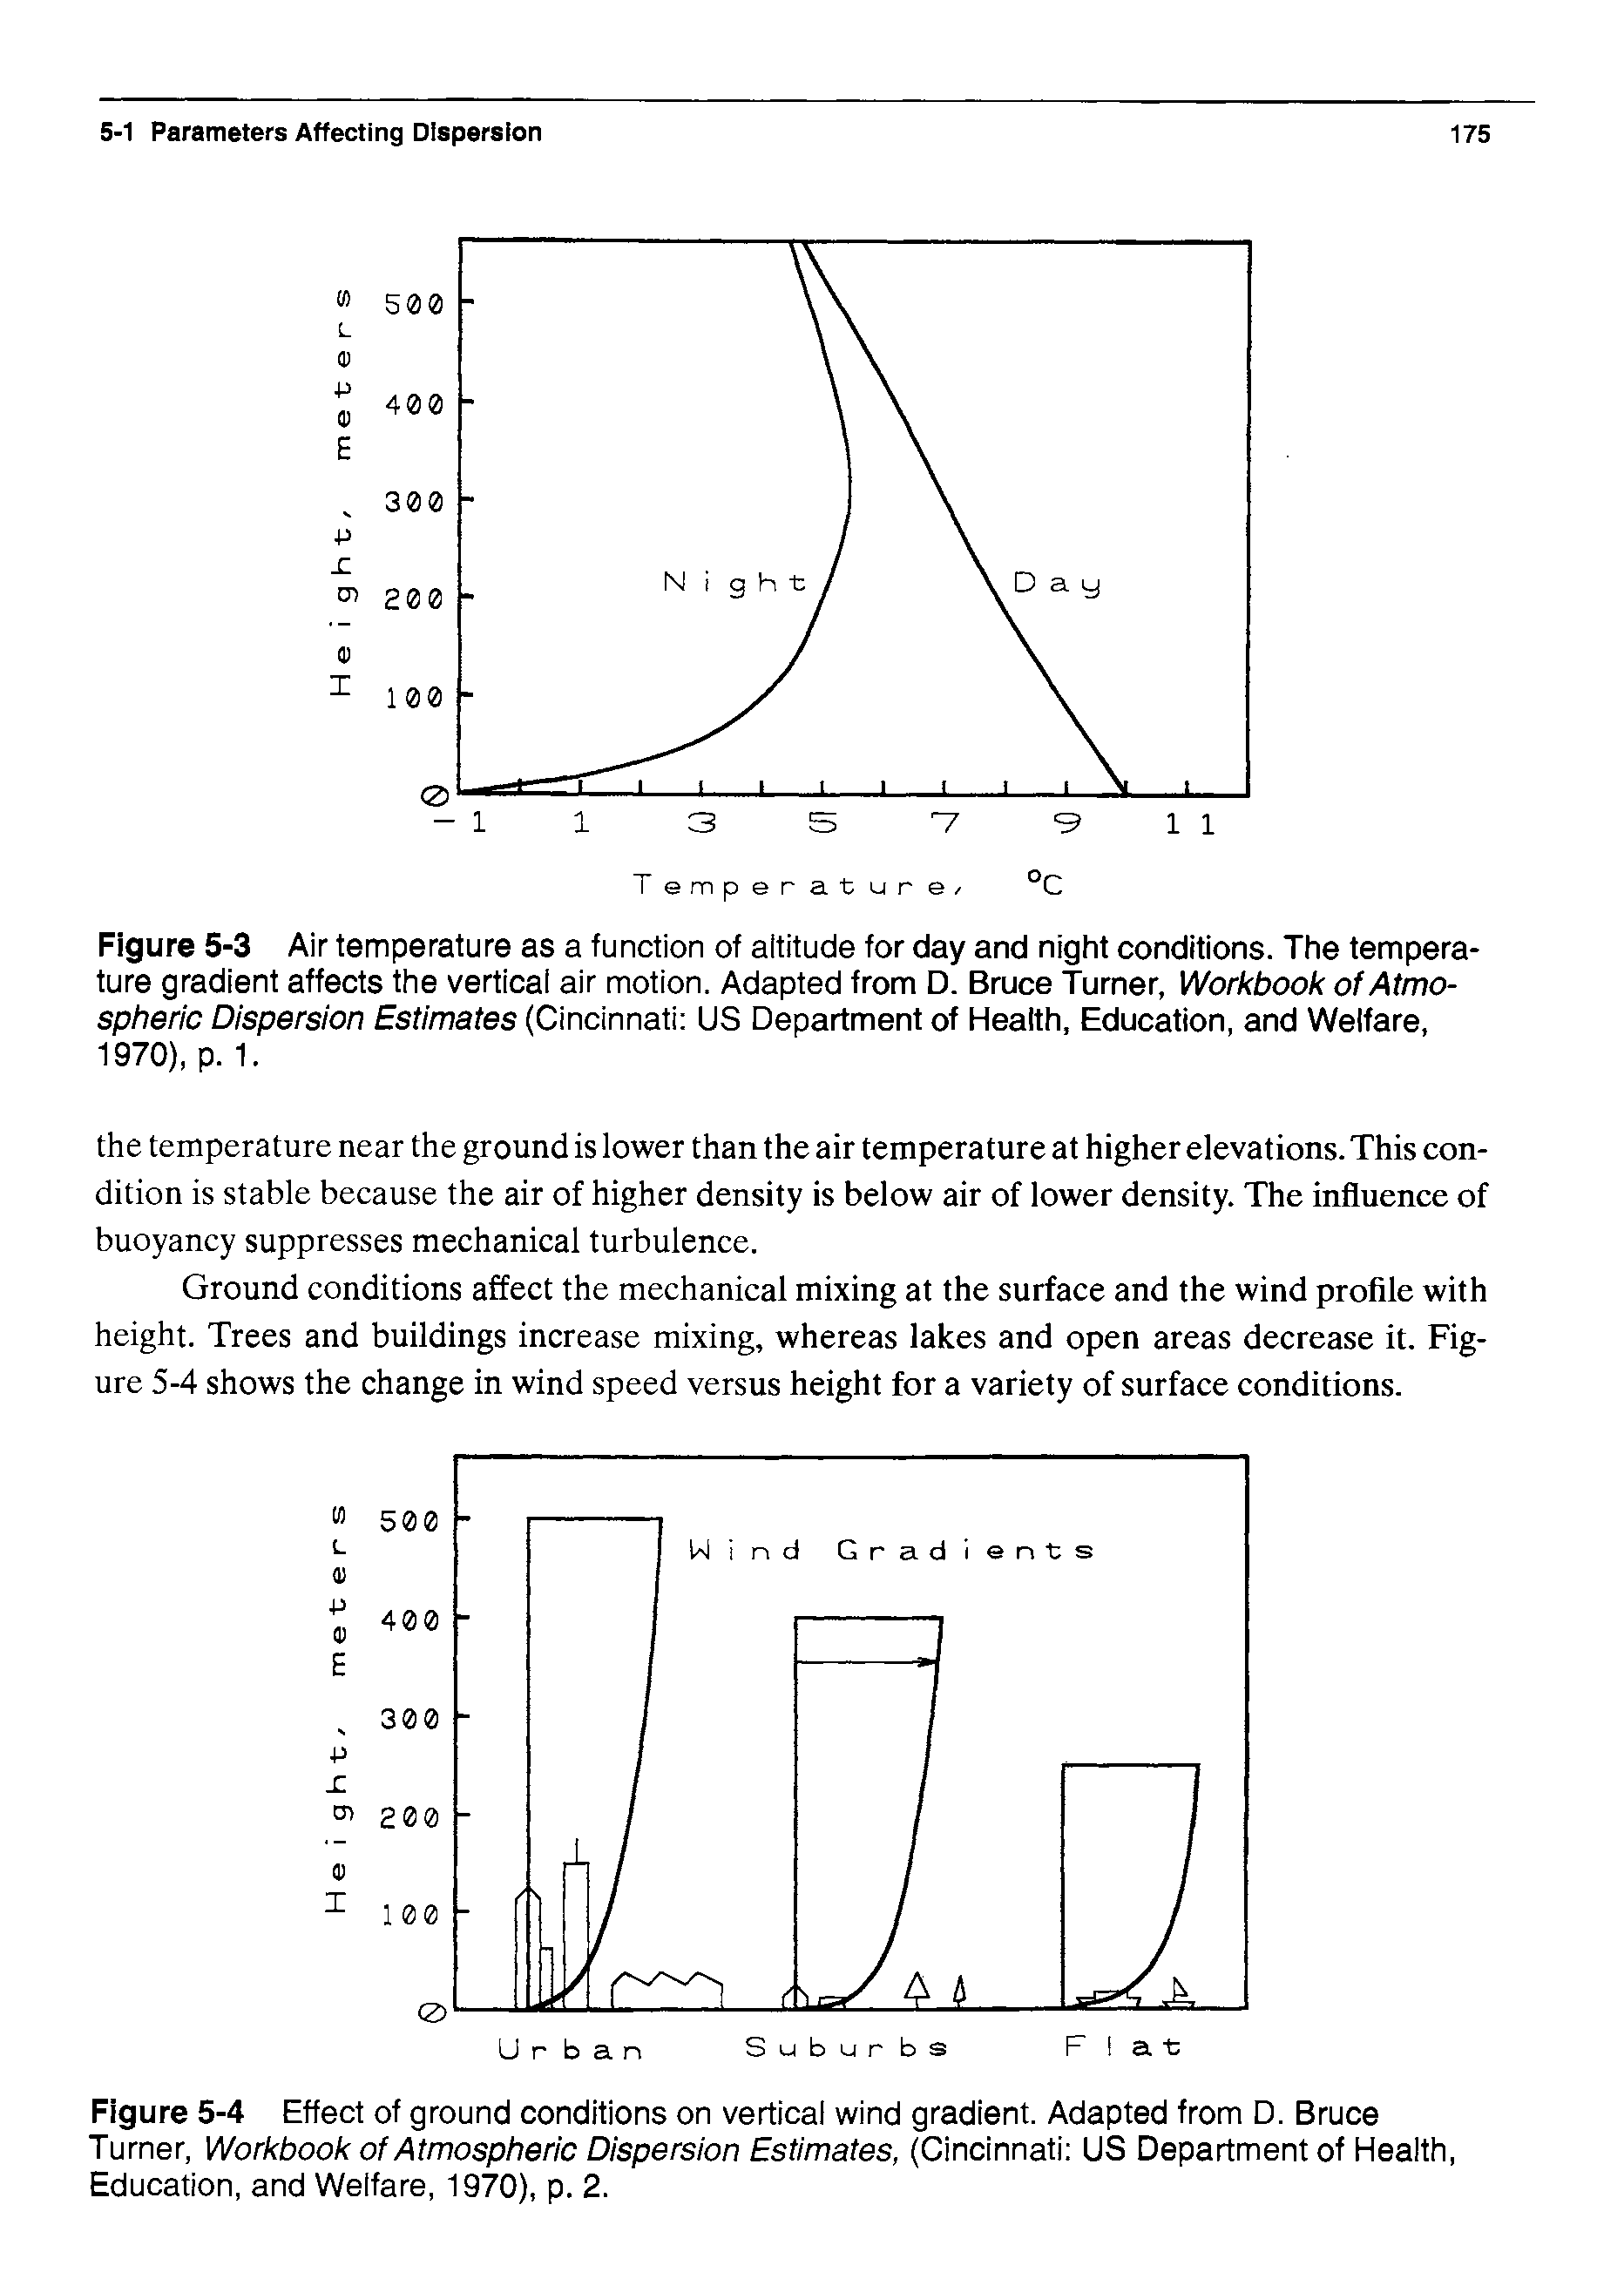 Figure 5-3 Air temperature as a function of altitude for day and night conditions. The temperature gradient affects the vertical air motion. Adapted from D. Bruce Turner, Workbook of Atmospheric Dispersion Estimates (Cincinnati US Department of Health, Education, and Welfare, 1970), p. 1.